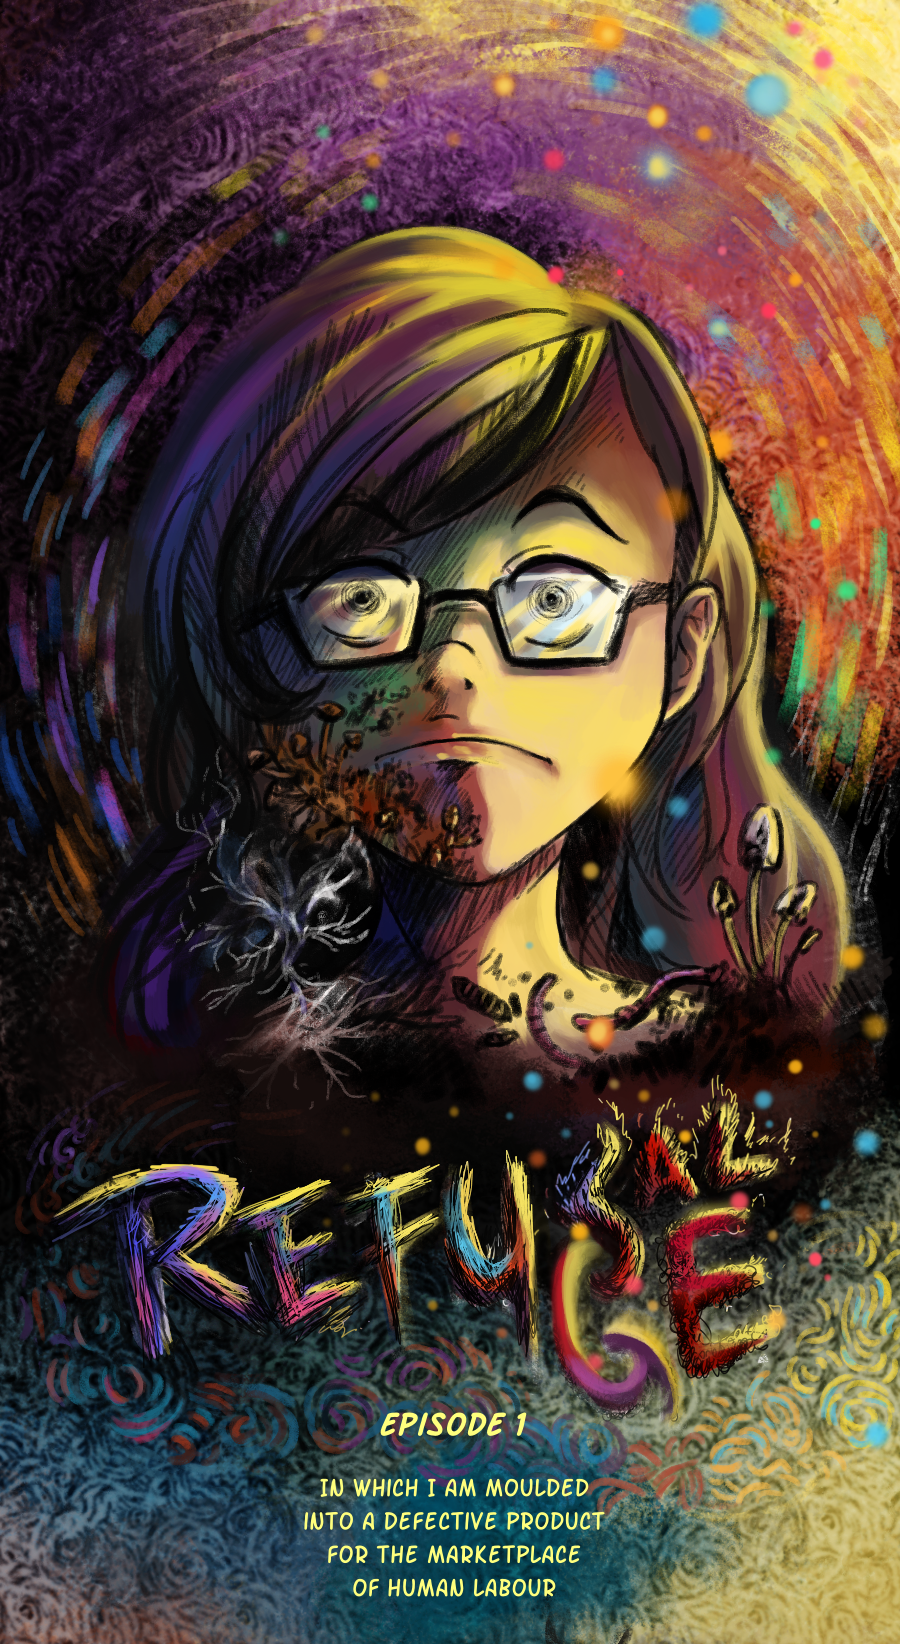 Opening scene from my webcomic Refu(SE/SL/GE), showing a slightly neurotic and psychedelic self-portrait, subtitled: 'In which I am moulded into a defective product for the marketplace of human labour